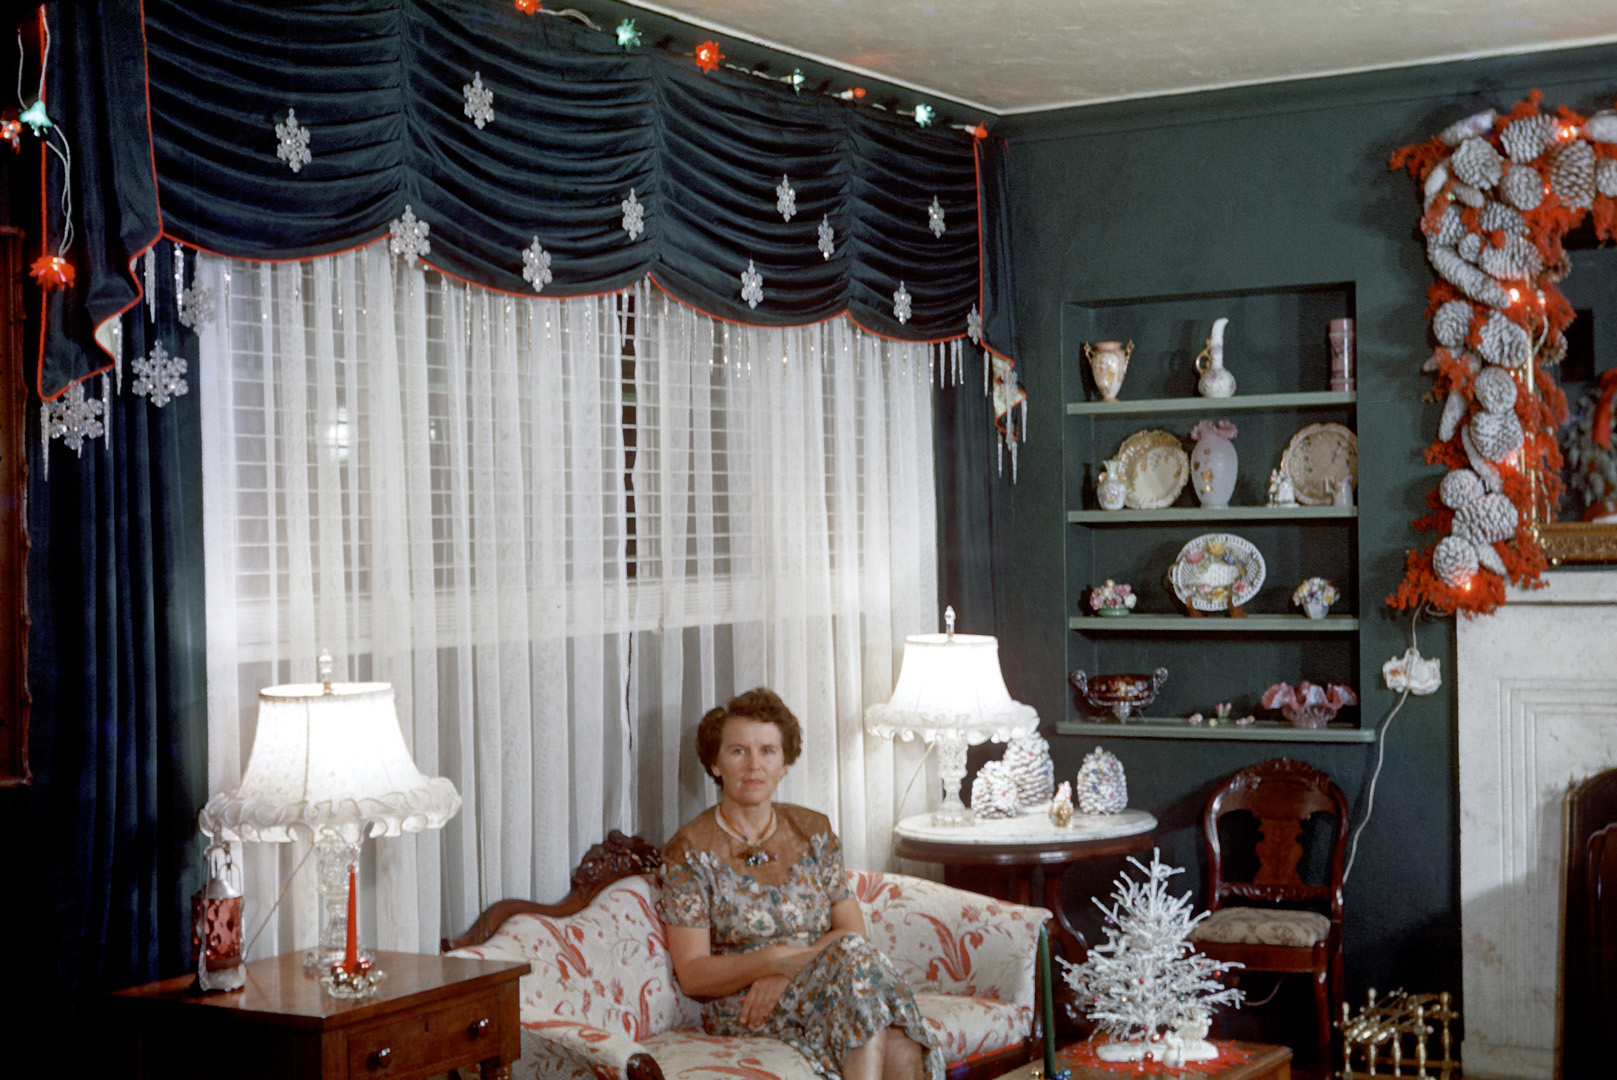 &nbsp; &nbsp; &nbsp; A holiday chestnut worth reheating over the Shorpy Duraflame.
"Christmas 1954." My grandmother Sarah Hall (1904-2000) in her living room in Miami Shores four years before I was born. She made the mantel decoration, which saw service for many years, with Brazilian pepper berries from a big tree in the backyard, mixed with pine cones, all attached to a chicken wire frame. Grandmother, handy with a needle and thread, also made the curtains. She was, needless to say, big on Christmas. 35mm Kodachrome. View full size.